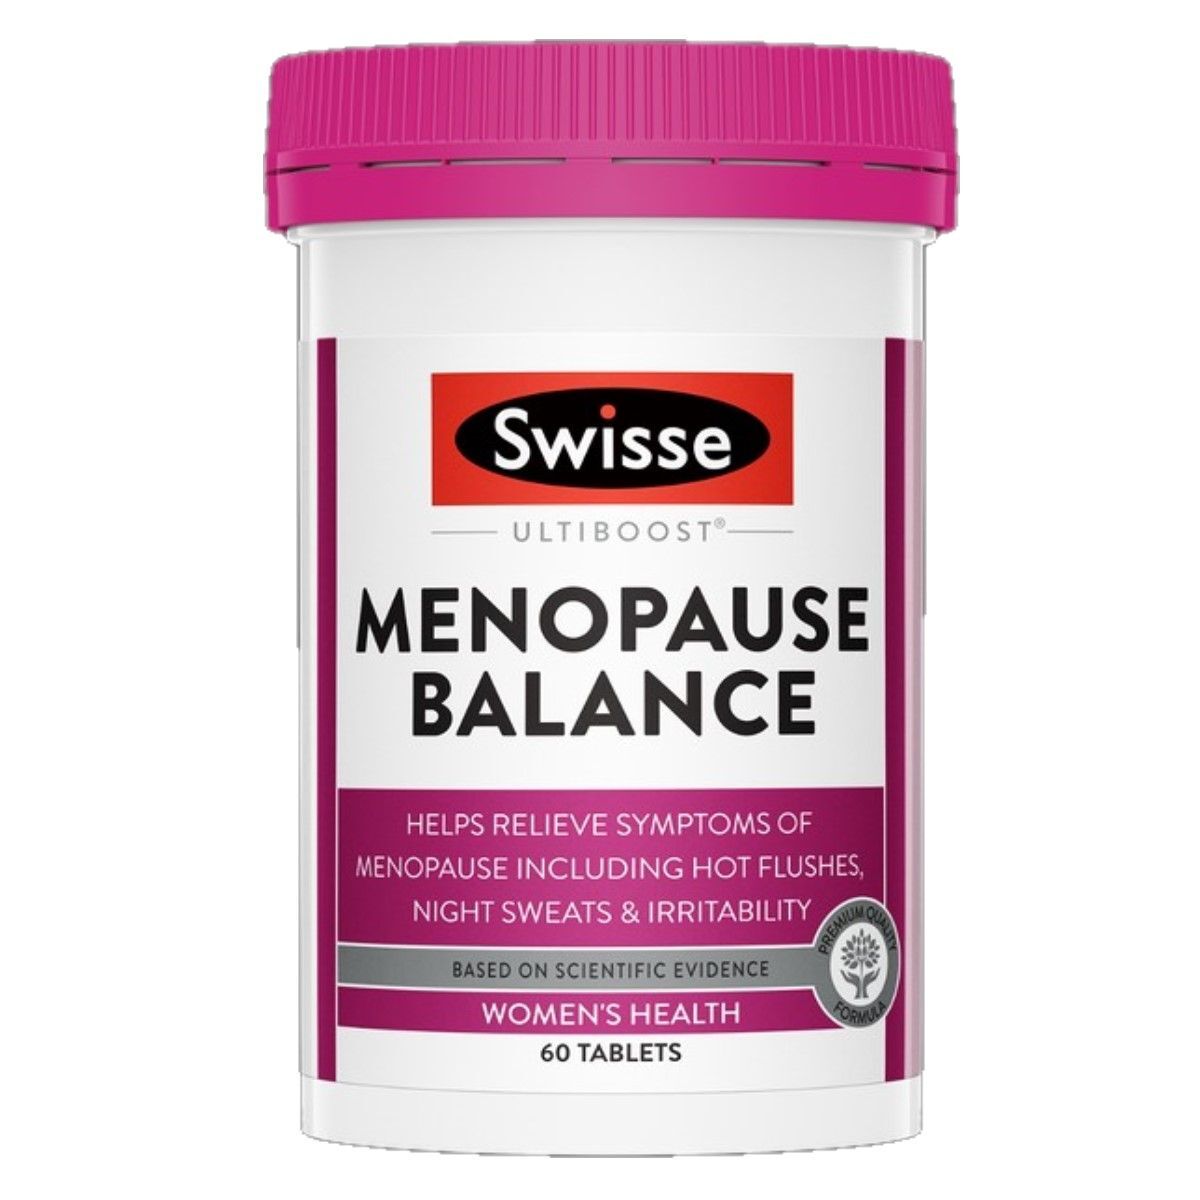 Menopause Balance 60 tablets [Parallel Goods]Best Before:31 January 2026